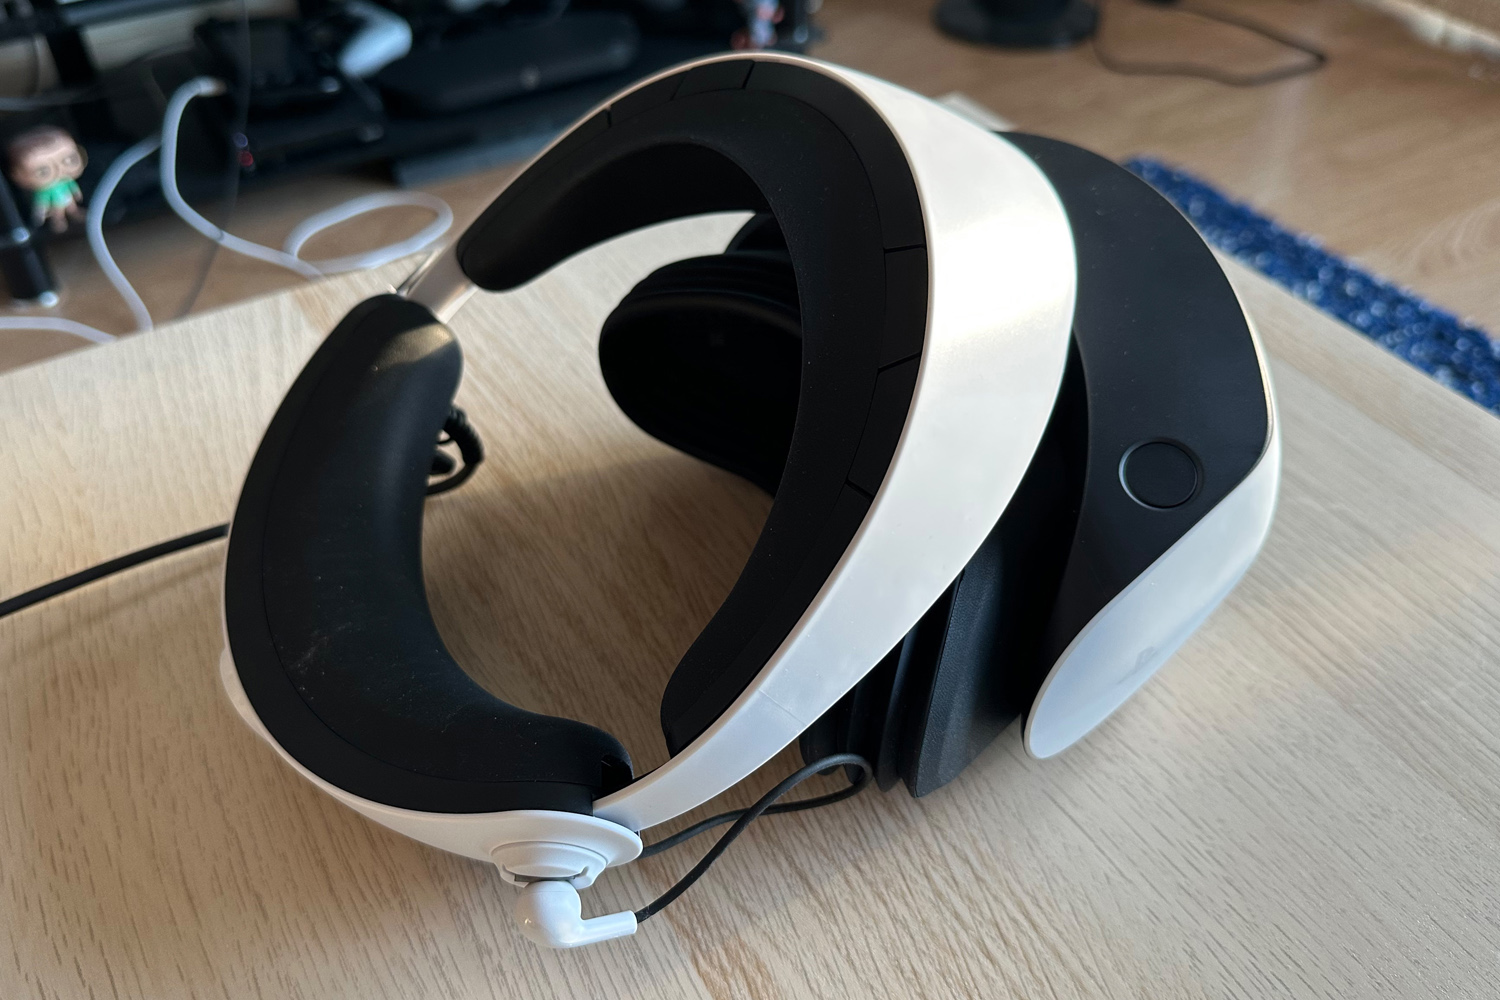  Sony Official PlayStation VR2 Headset (Slightly